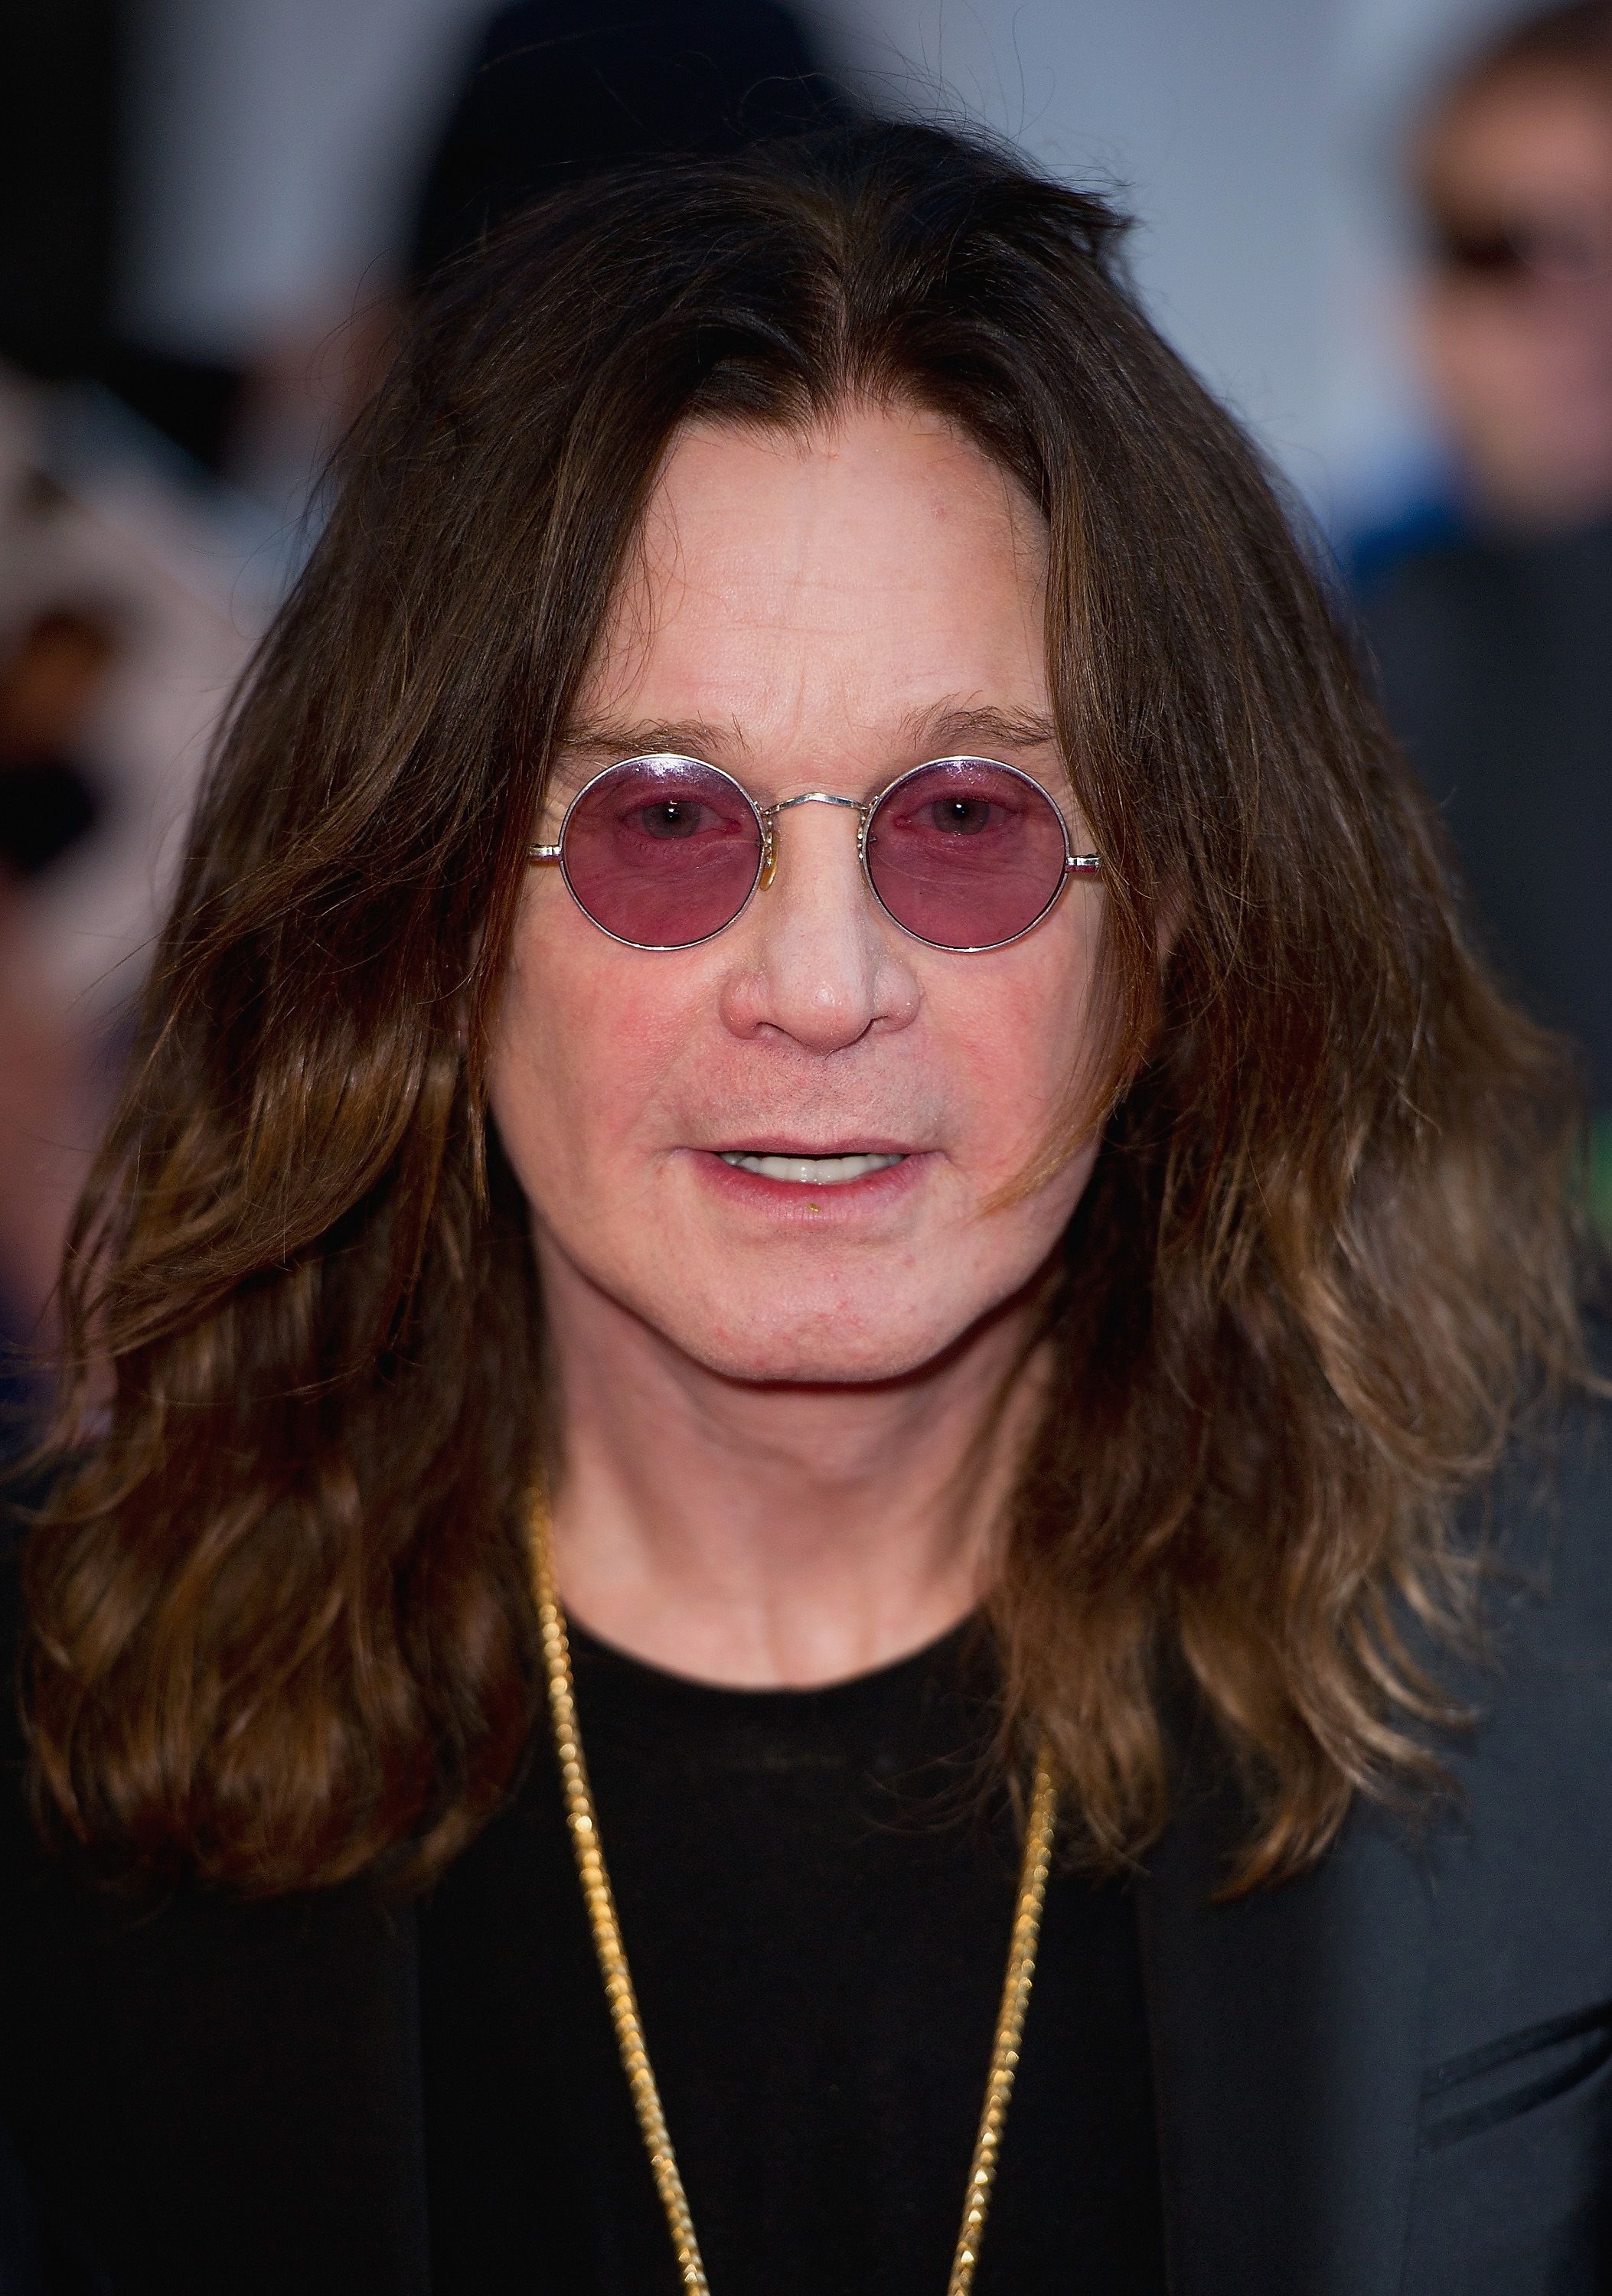 Ozzy Osbourne during the Pride of Britain awards at The Grosvenor House Hotel on September 28, 2015, in London, England. | Source: Getty Images